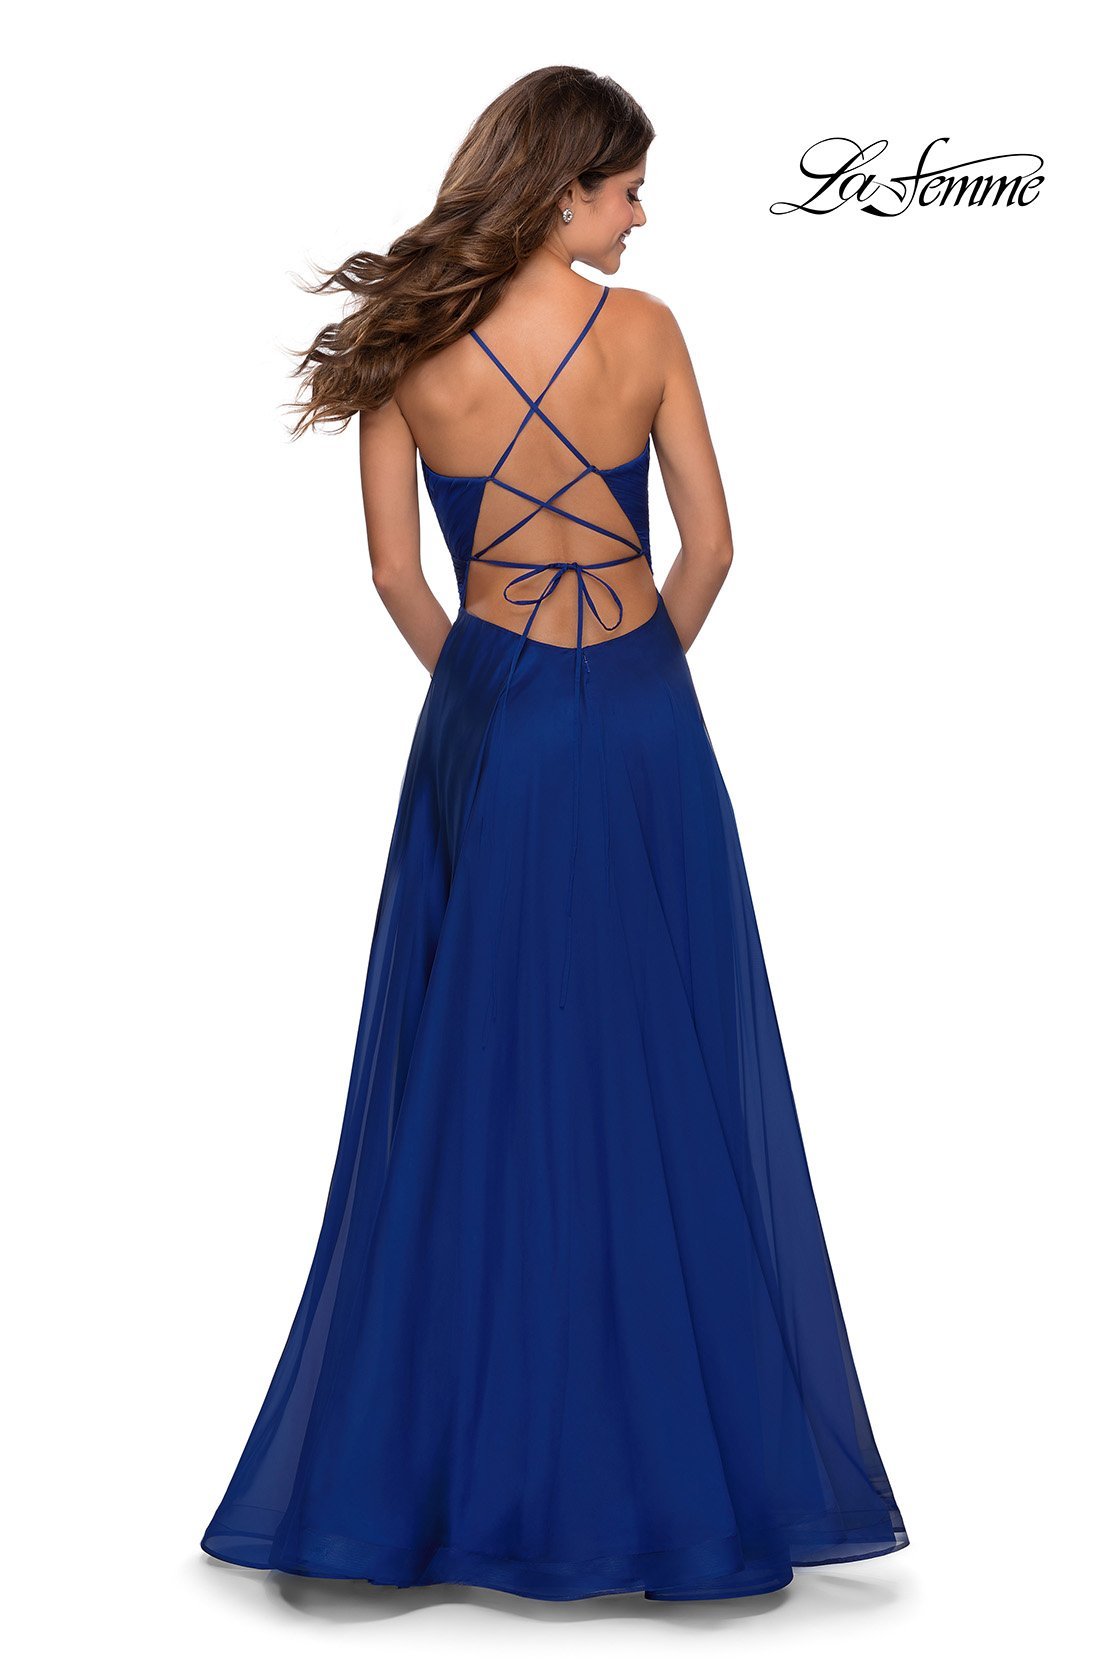 La Femme 28575 dress images in these colors: Emerald, Marine Blue, Wine.